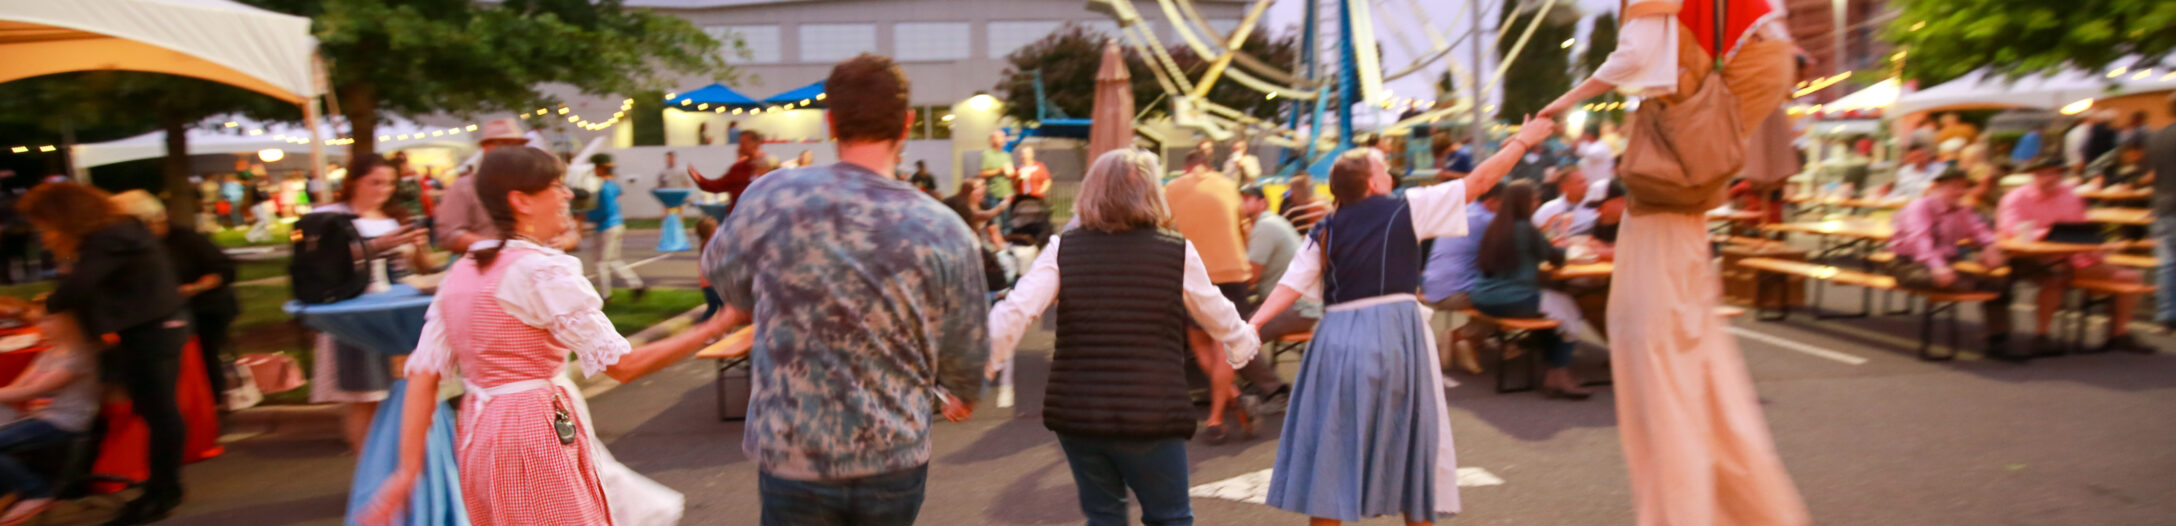 People in dirndl and lederhosen dance with a stilt walker at a carnival at dusk. There is a ferris wheel in the background.